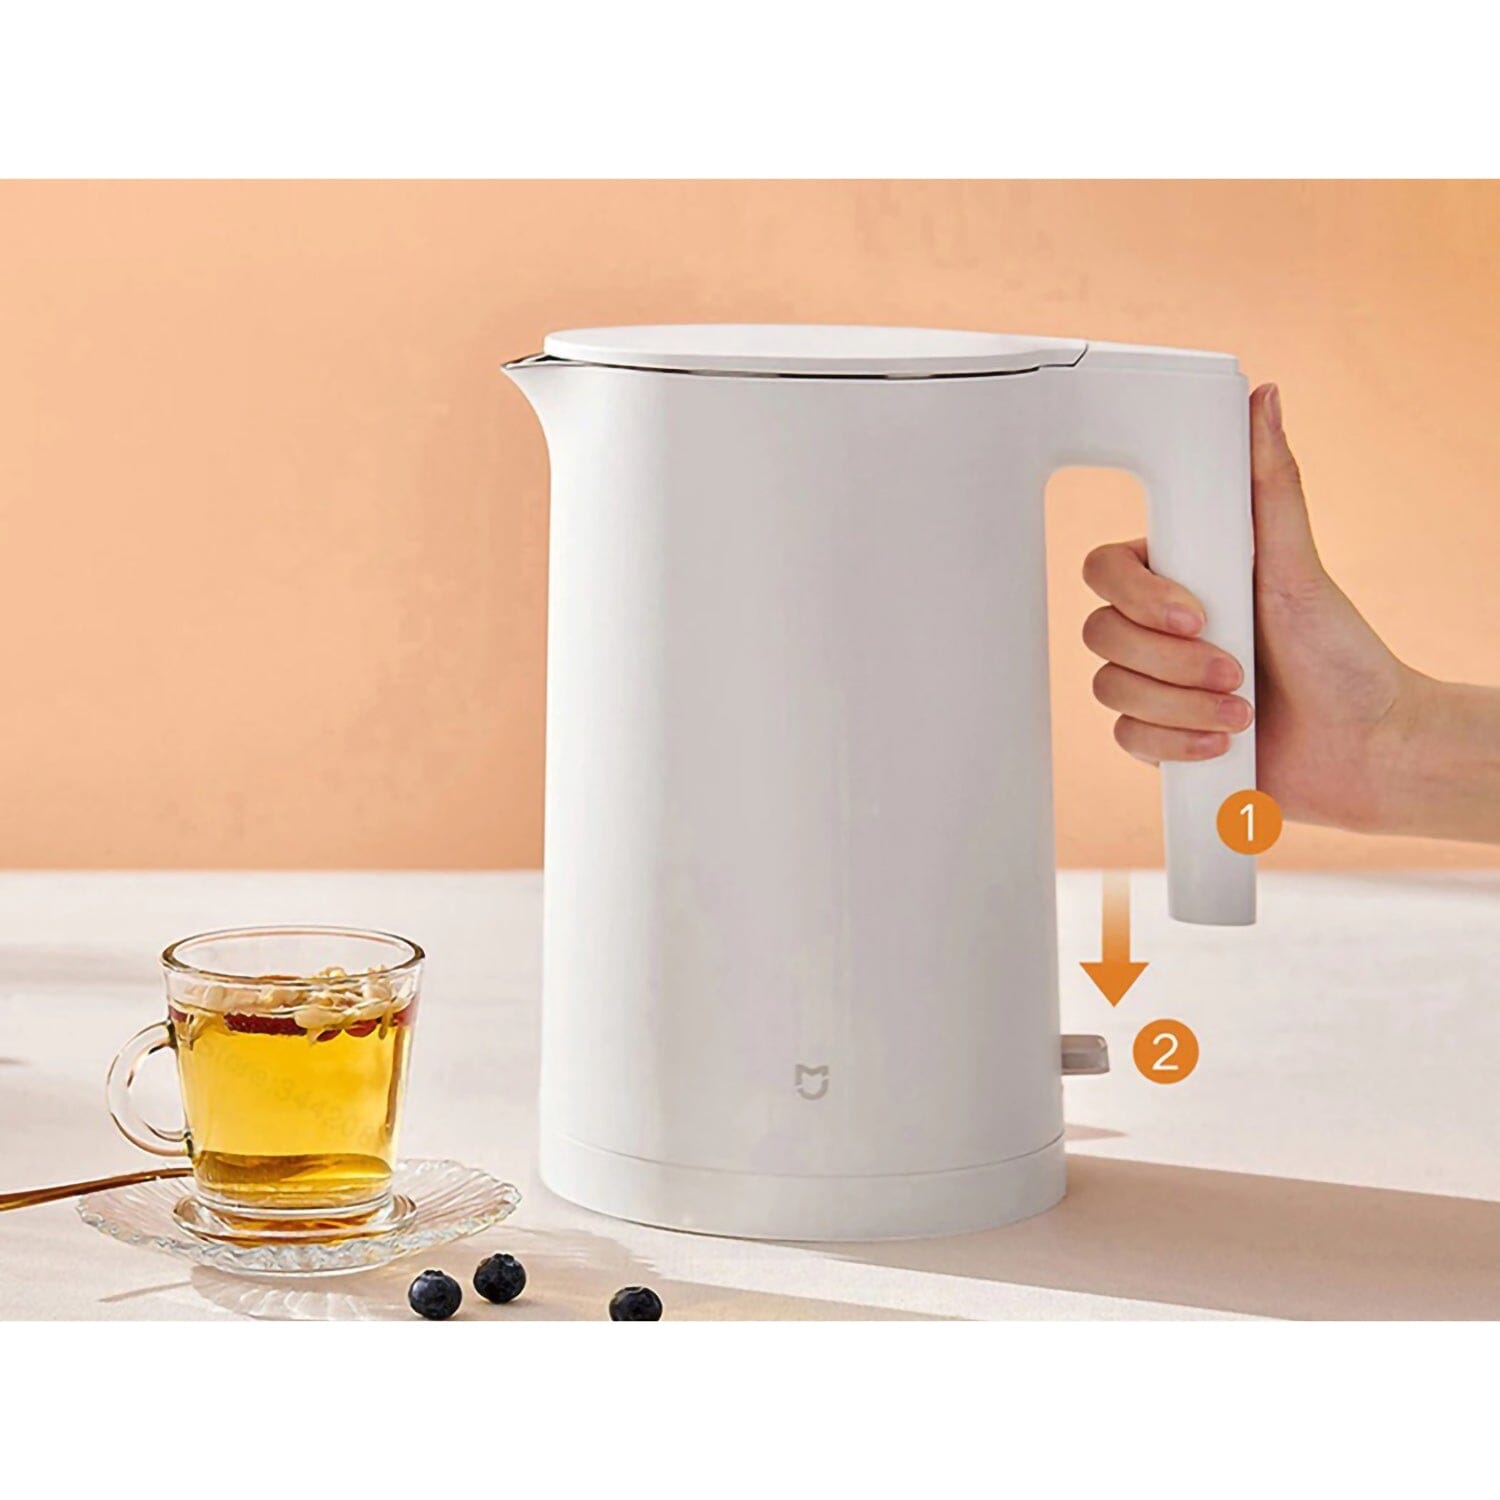 Xiaomi Mi Electric Kettle 2 Upgraded 1.7L high capacity up to 8 cups | 1800W , 304 stainless steel [Local Official Warranty] Xiaomi 